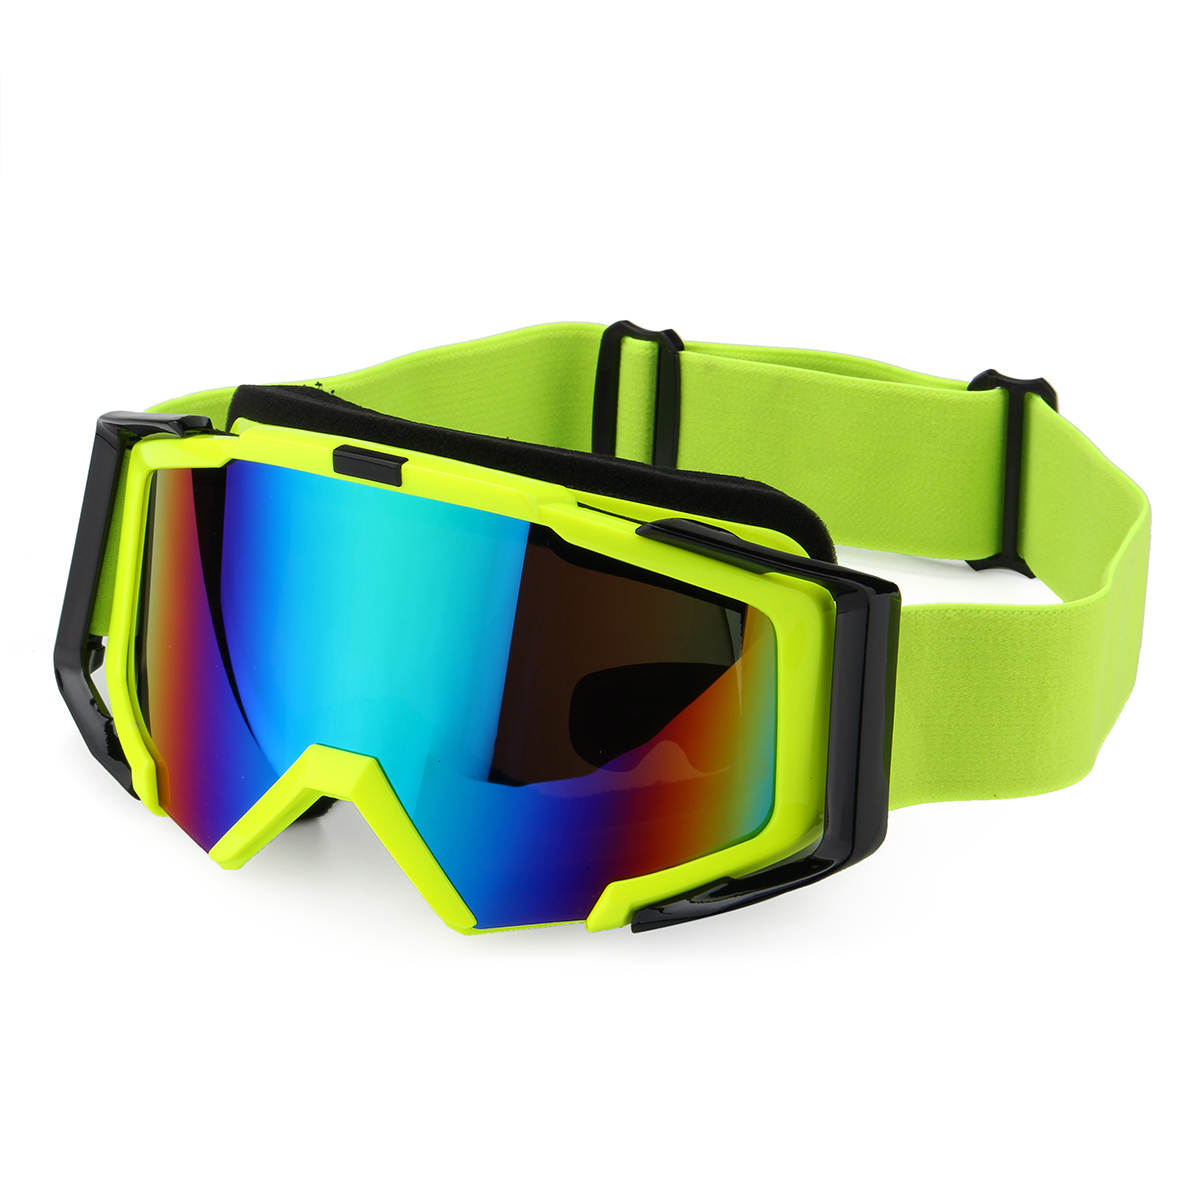 TYX76-Outdoor-Skiing-Skating-Goggles-Snowmobile-Glasses-Windproof-Anti-Fog-UV-Protection-For-Men-Wom-1358893